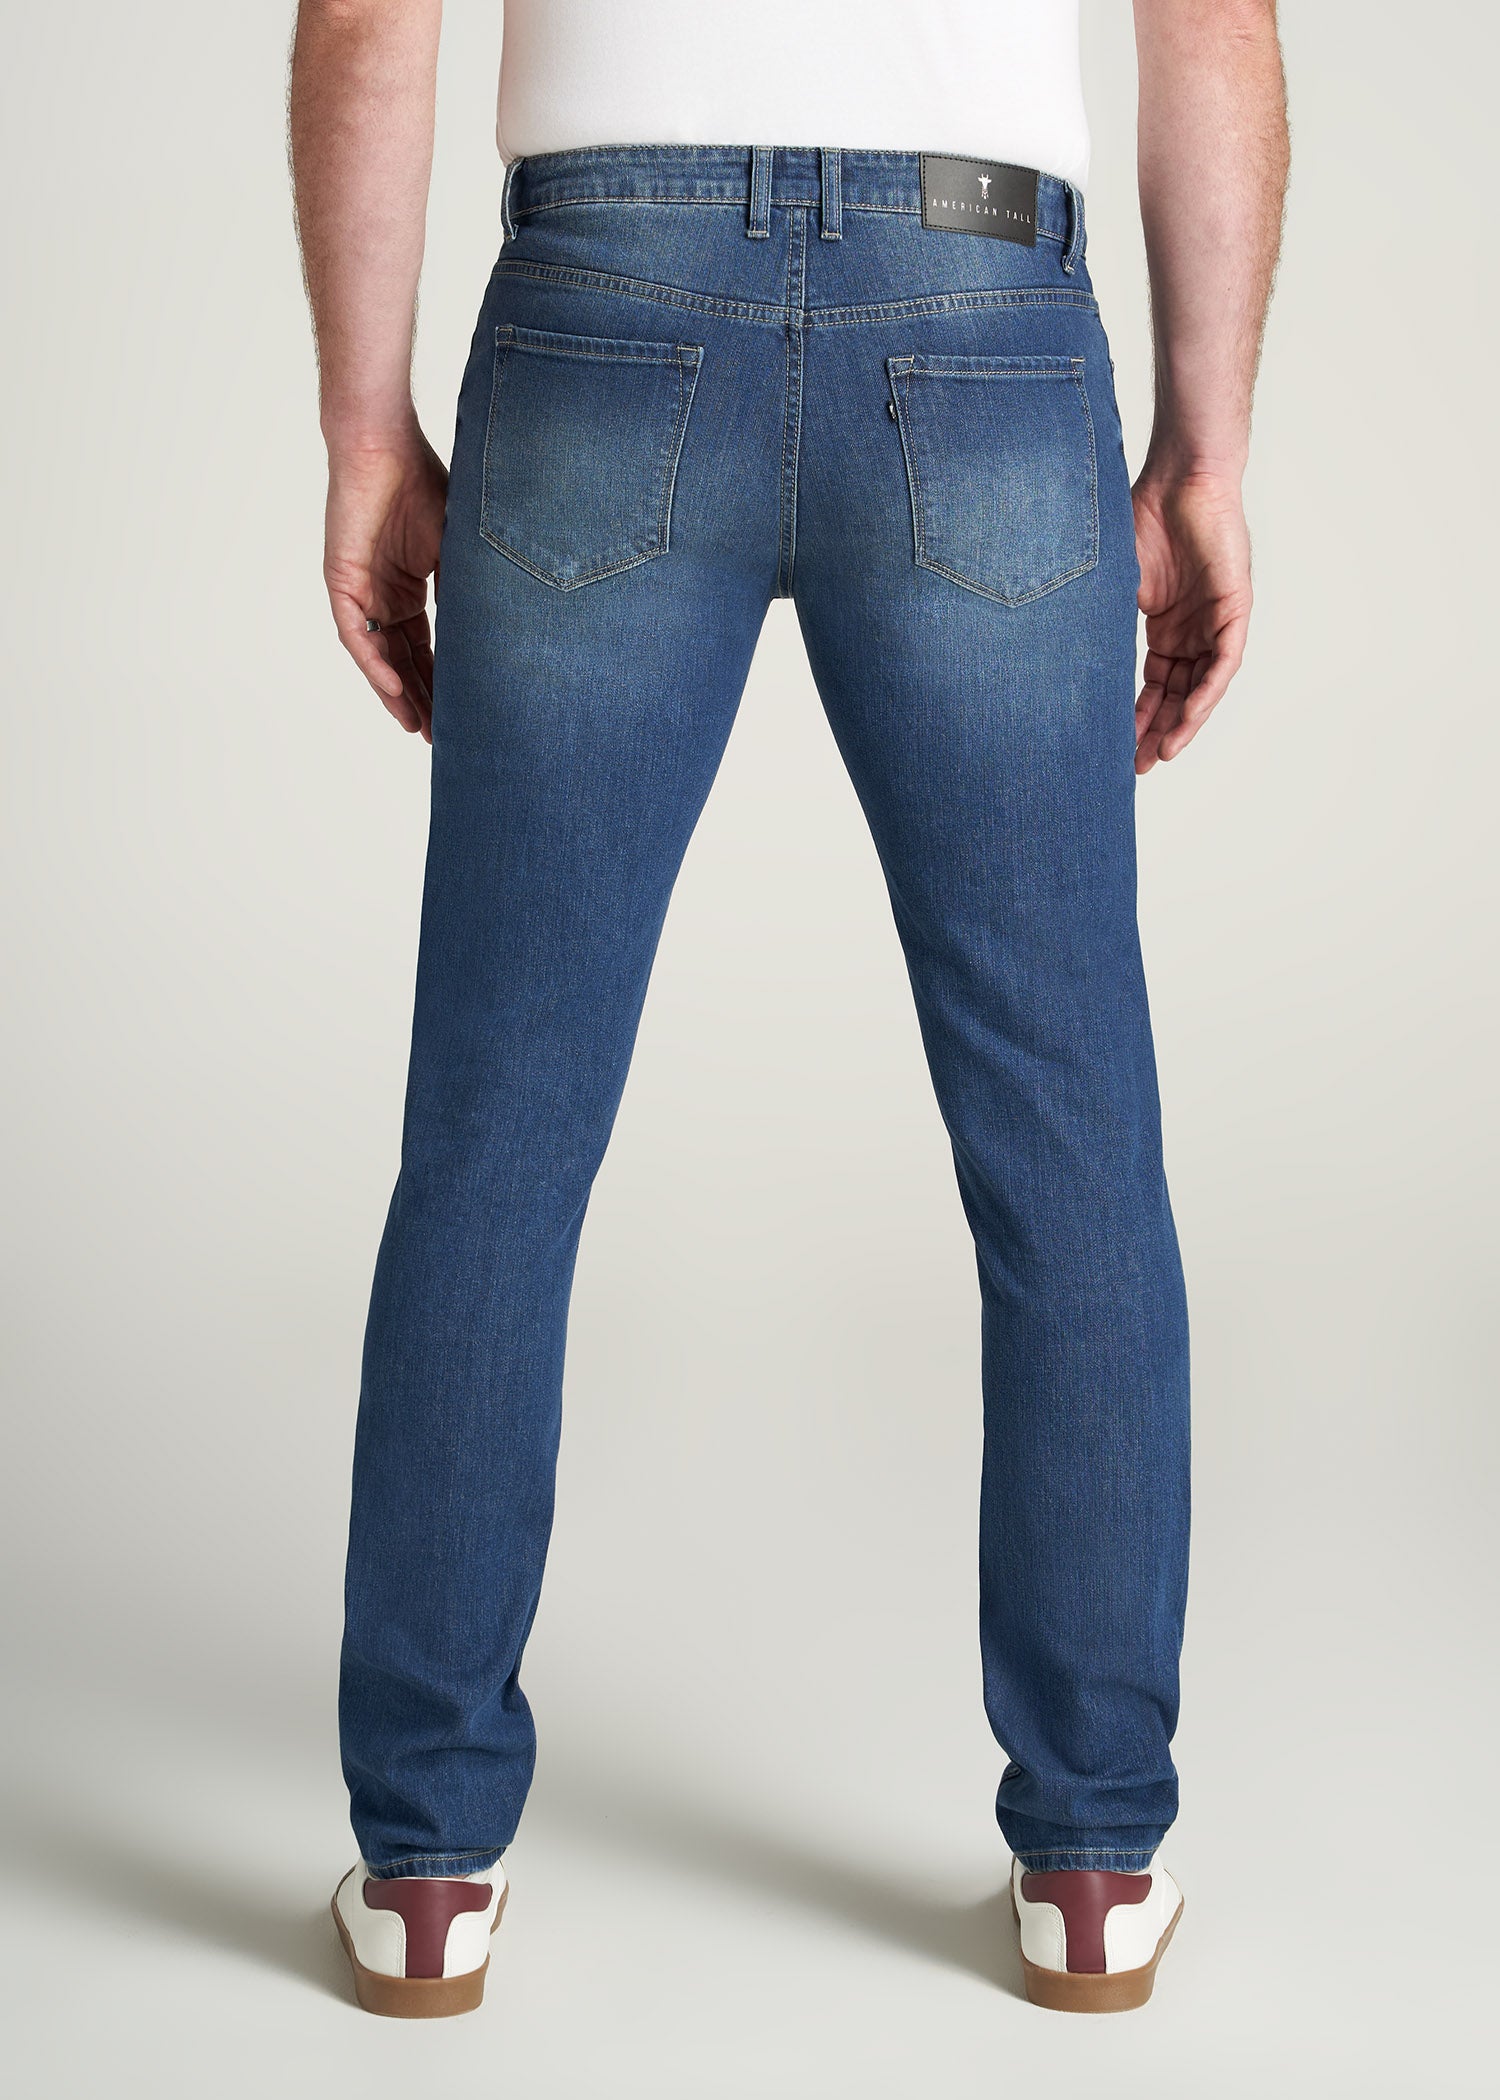 Carman Tapered Jeans for Tall Men | American Tall